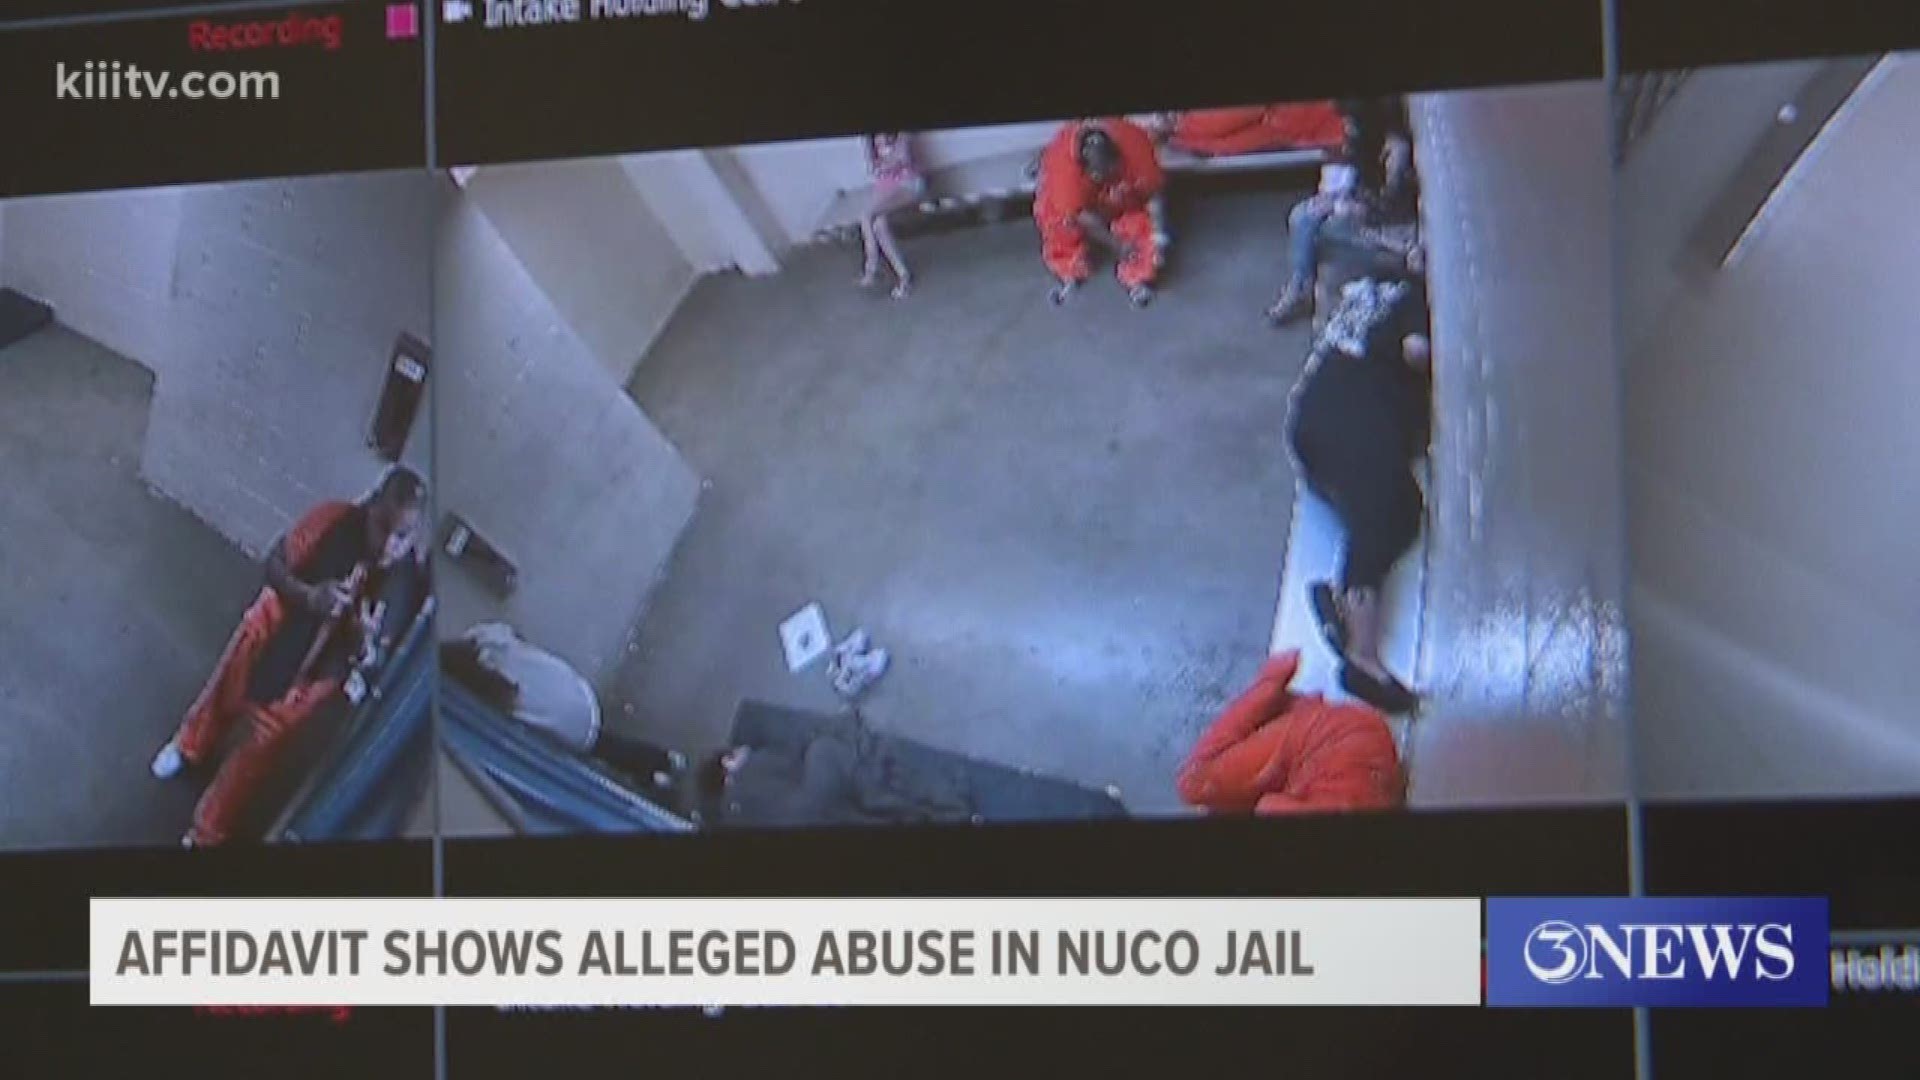 At least four Nueces County jailers are under investigation after allegations of violence and tampering with government documents came to light.